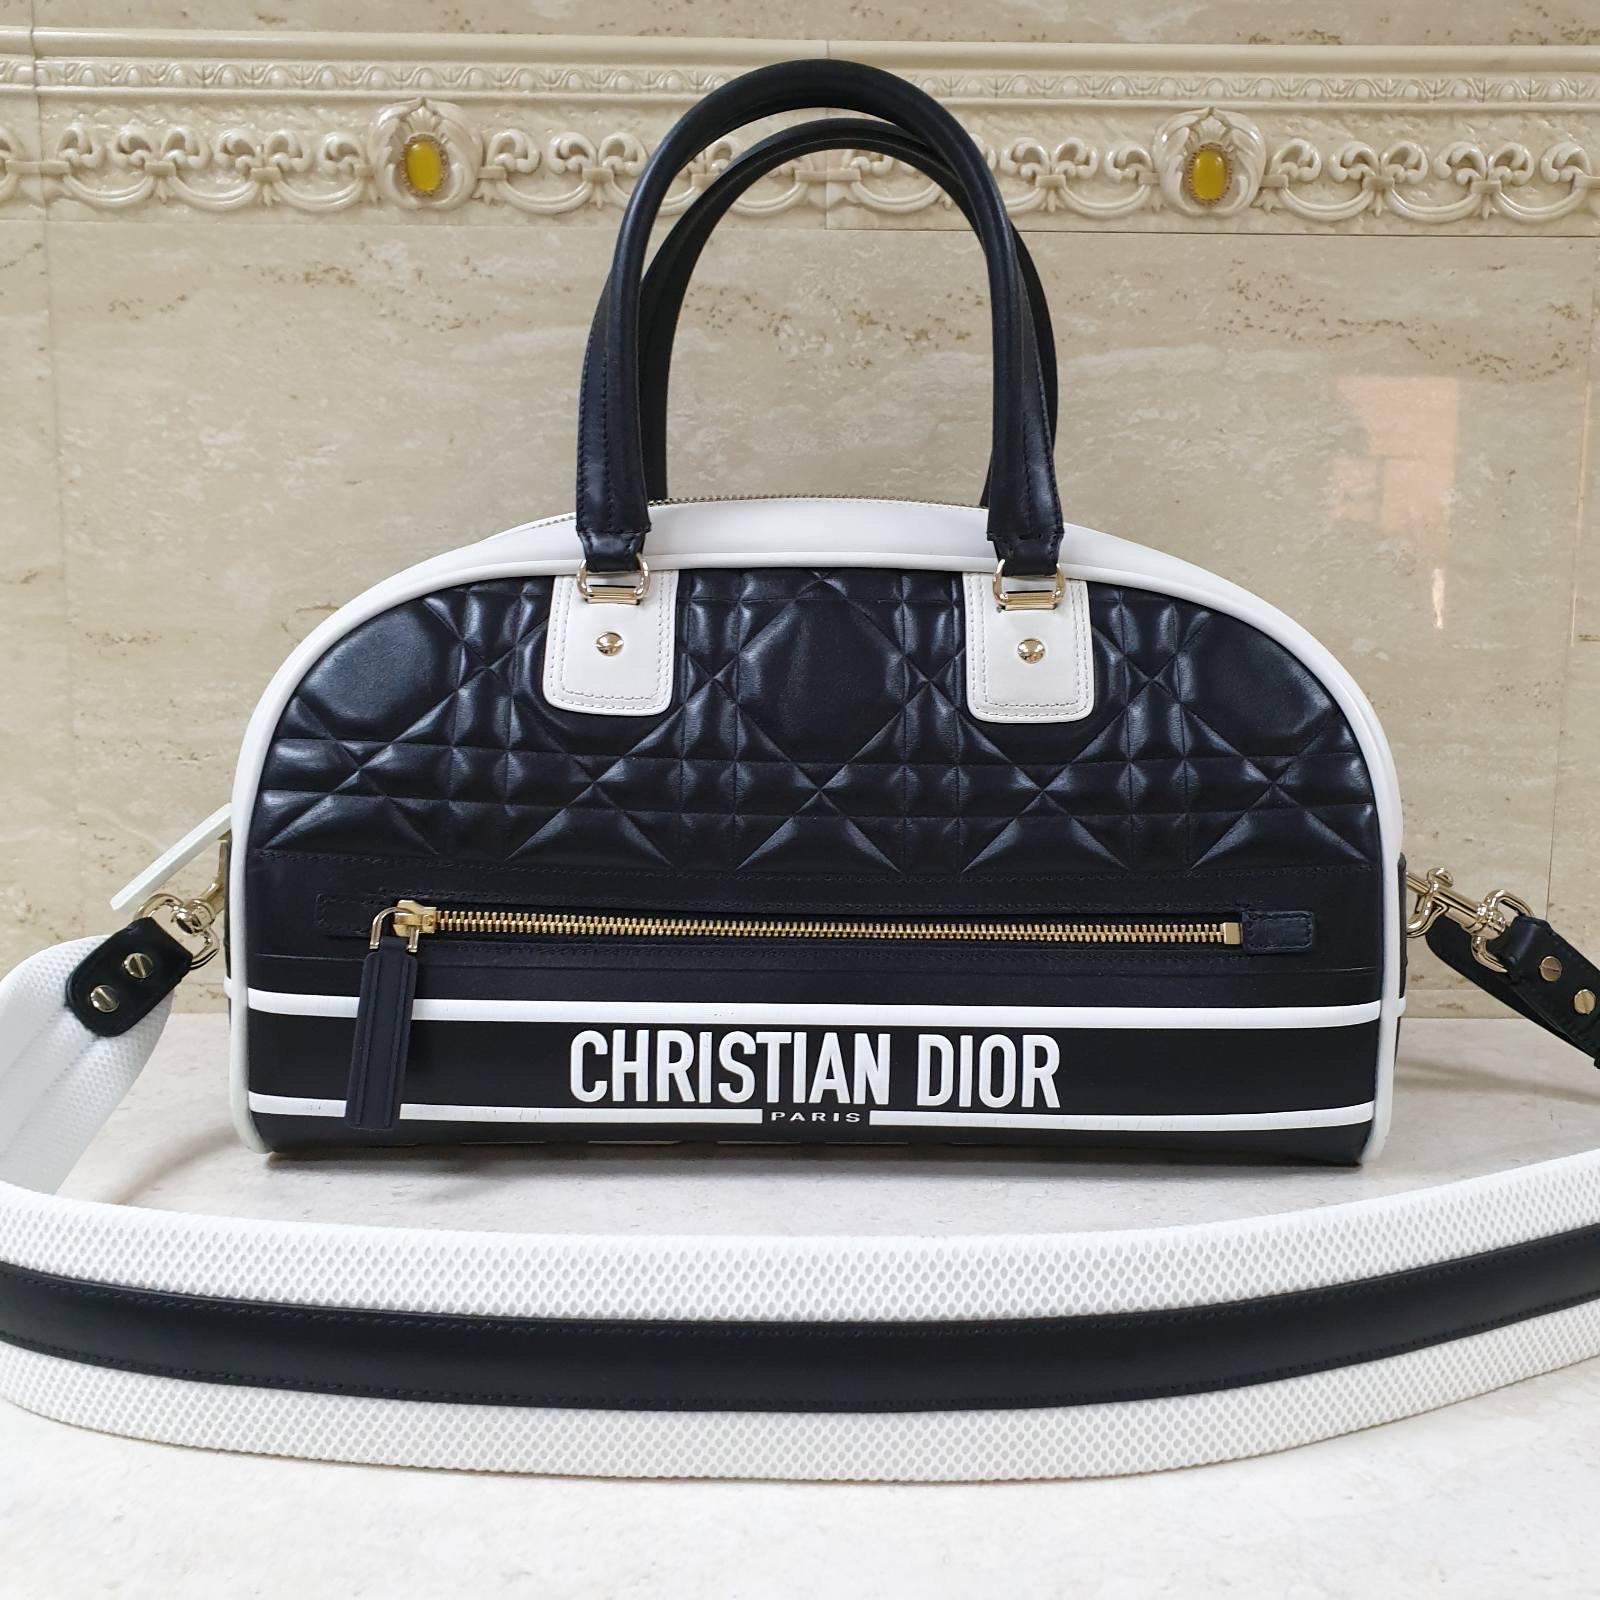 Christian Dior Medium Vibe Zip Bowling Bag In Good Condition For Sale In Krakow, PL